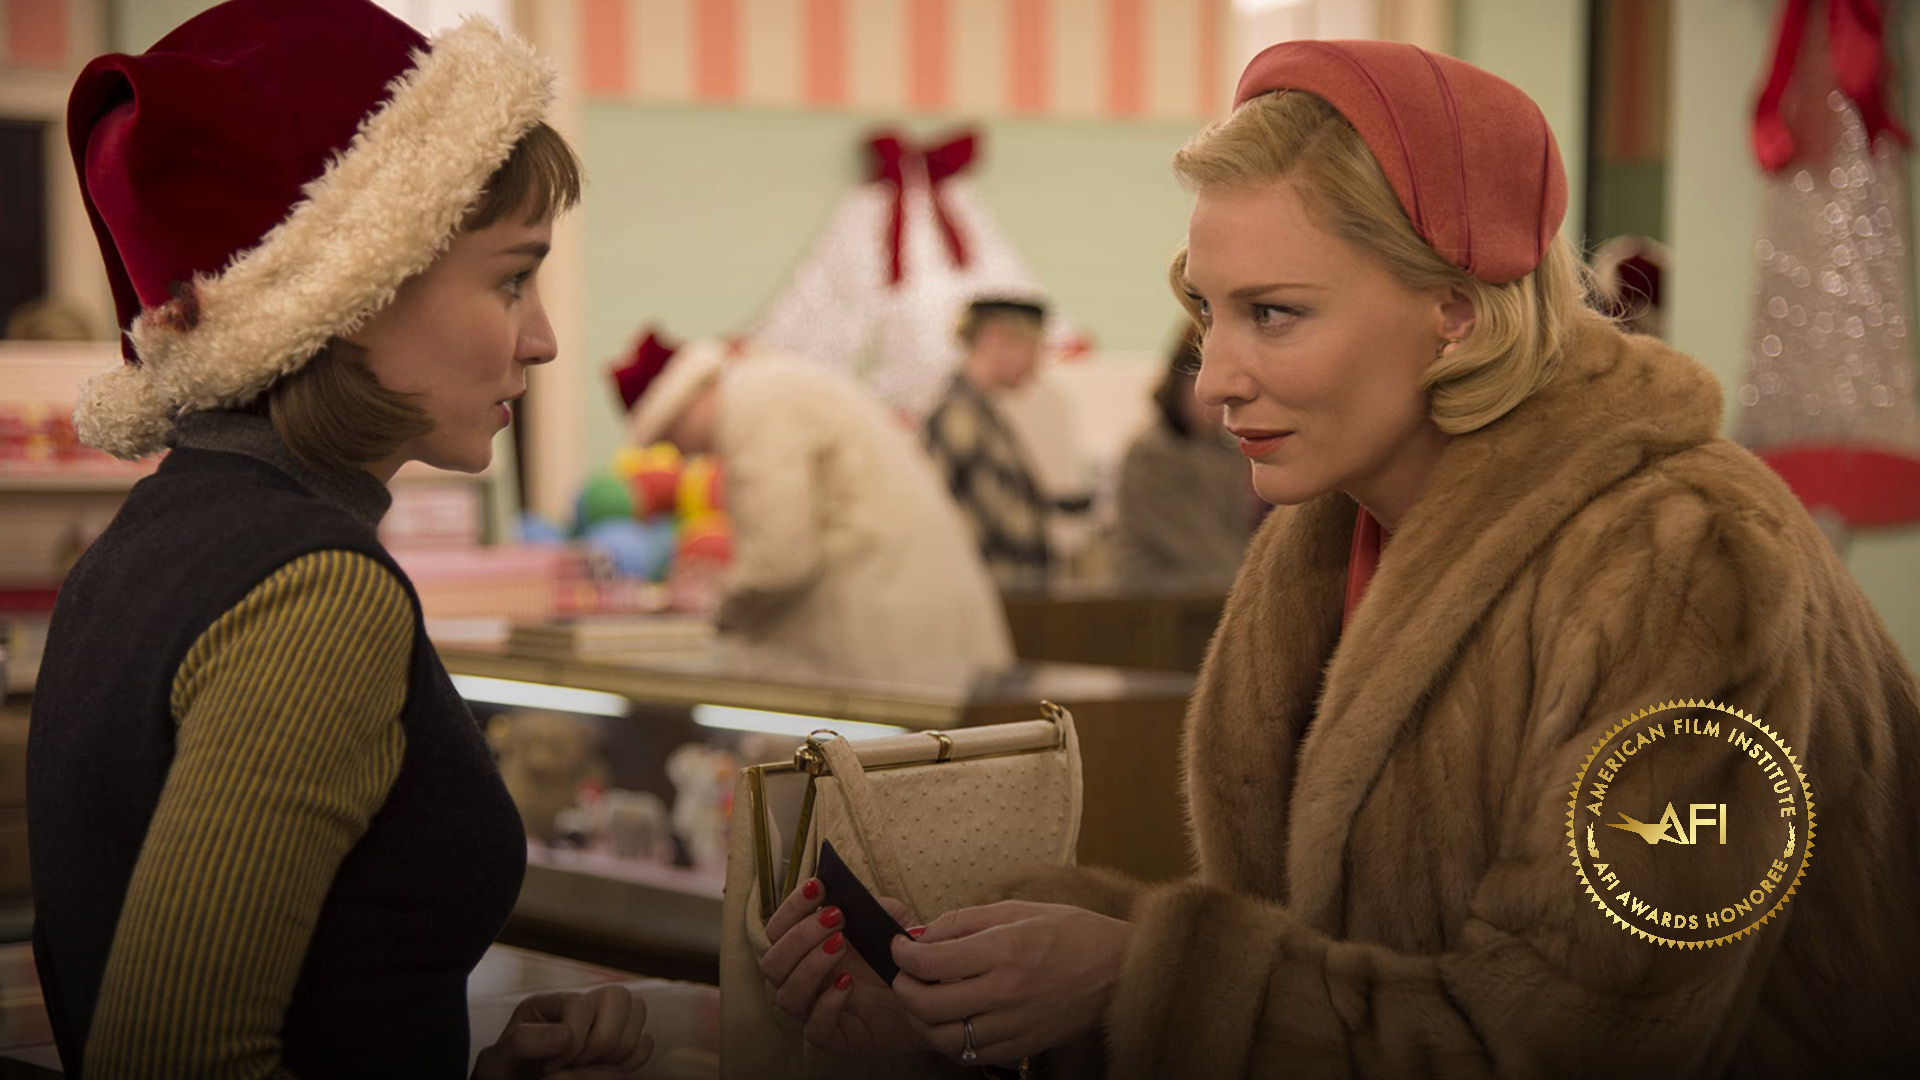 Pride Month Movie Guide - CAROL – Carol Aird and Therese Belivet